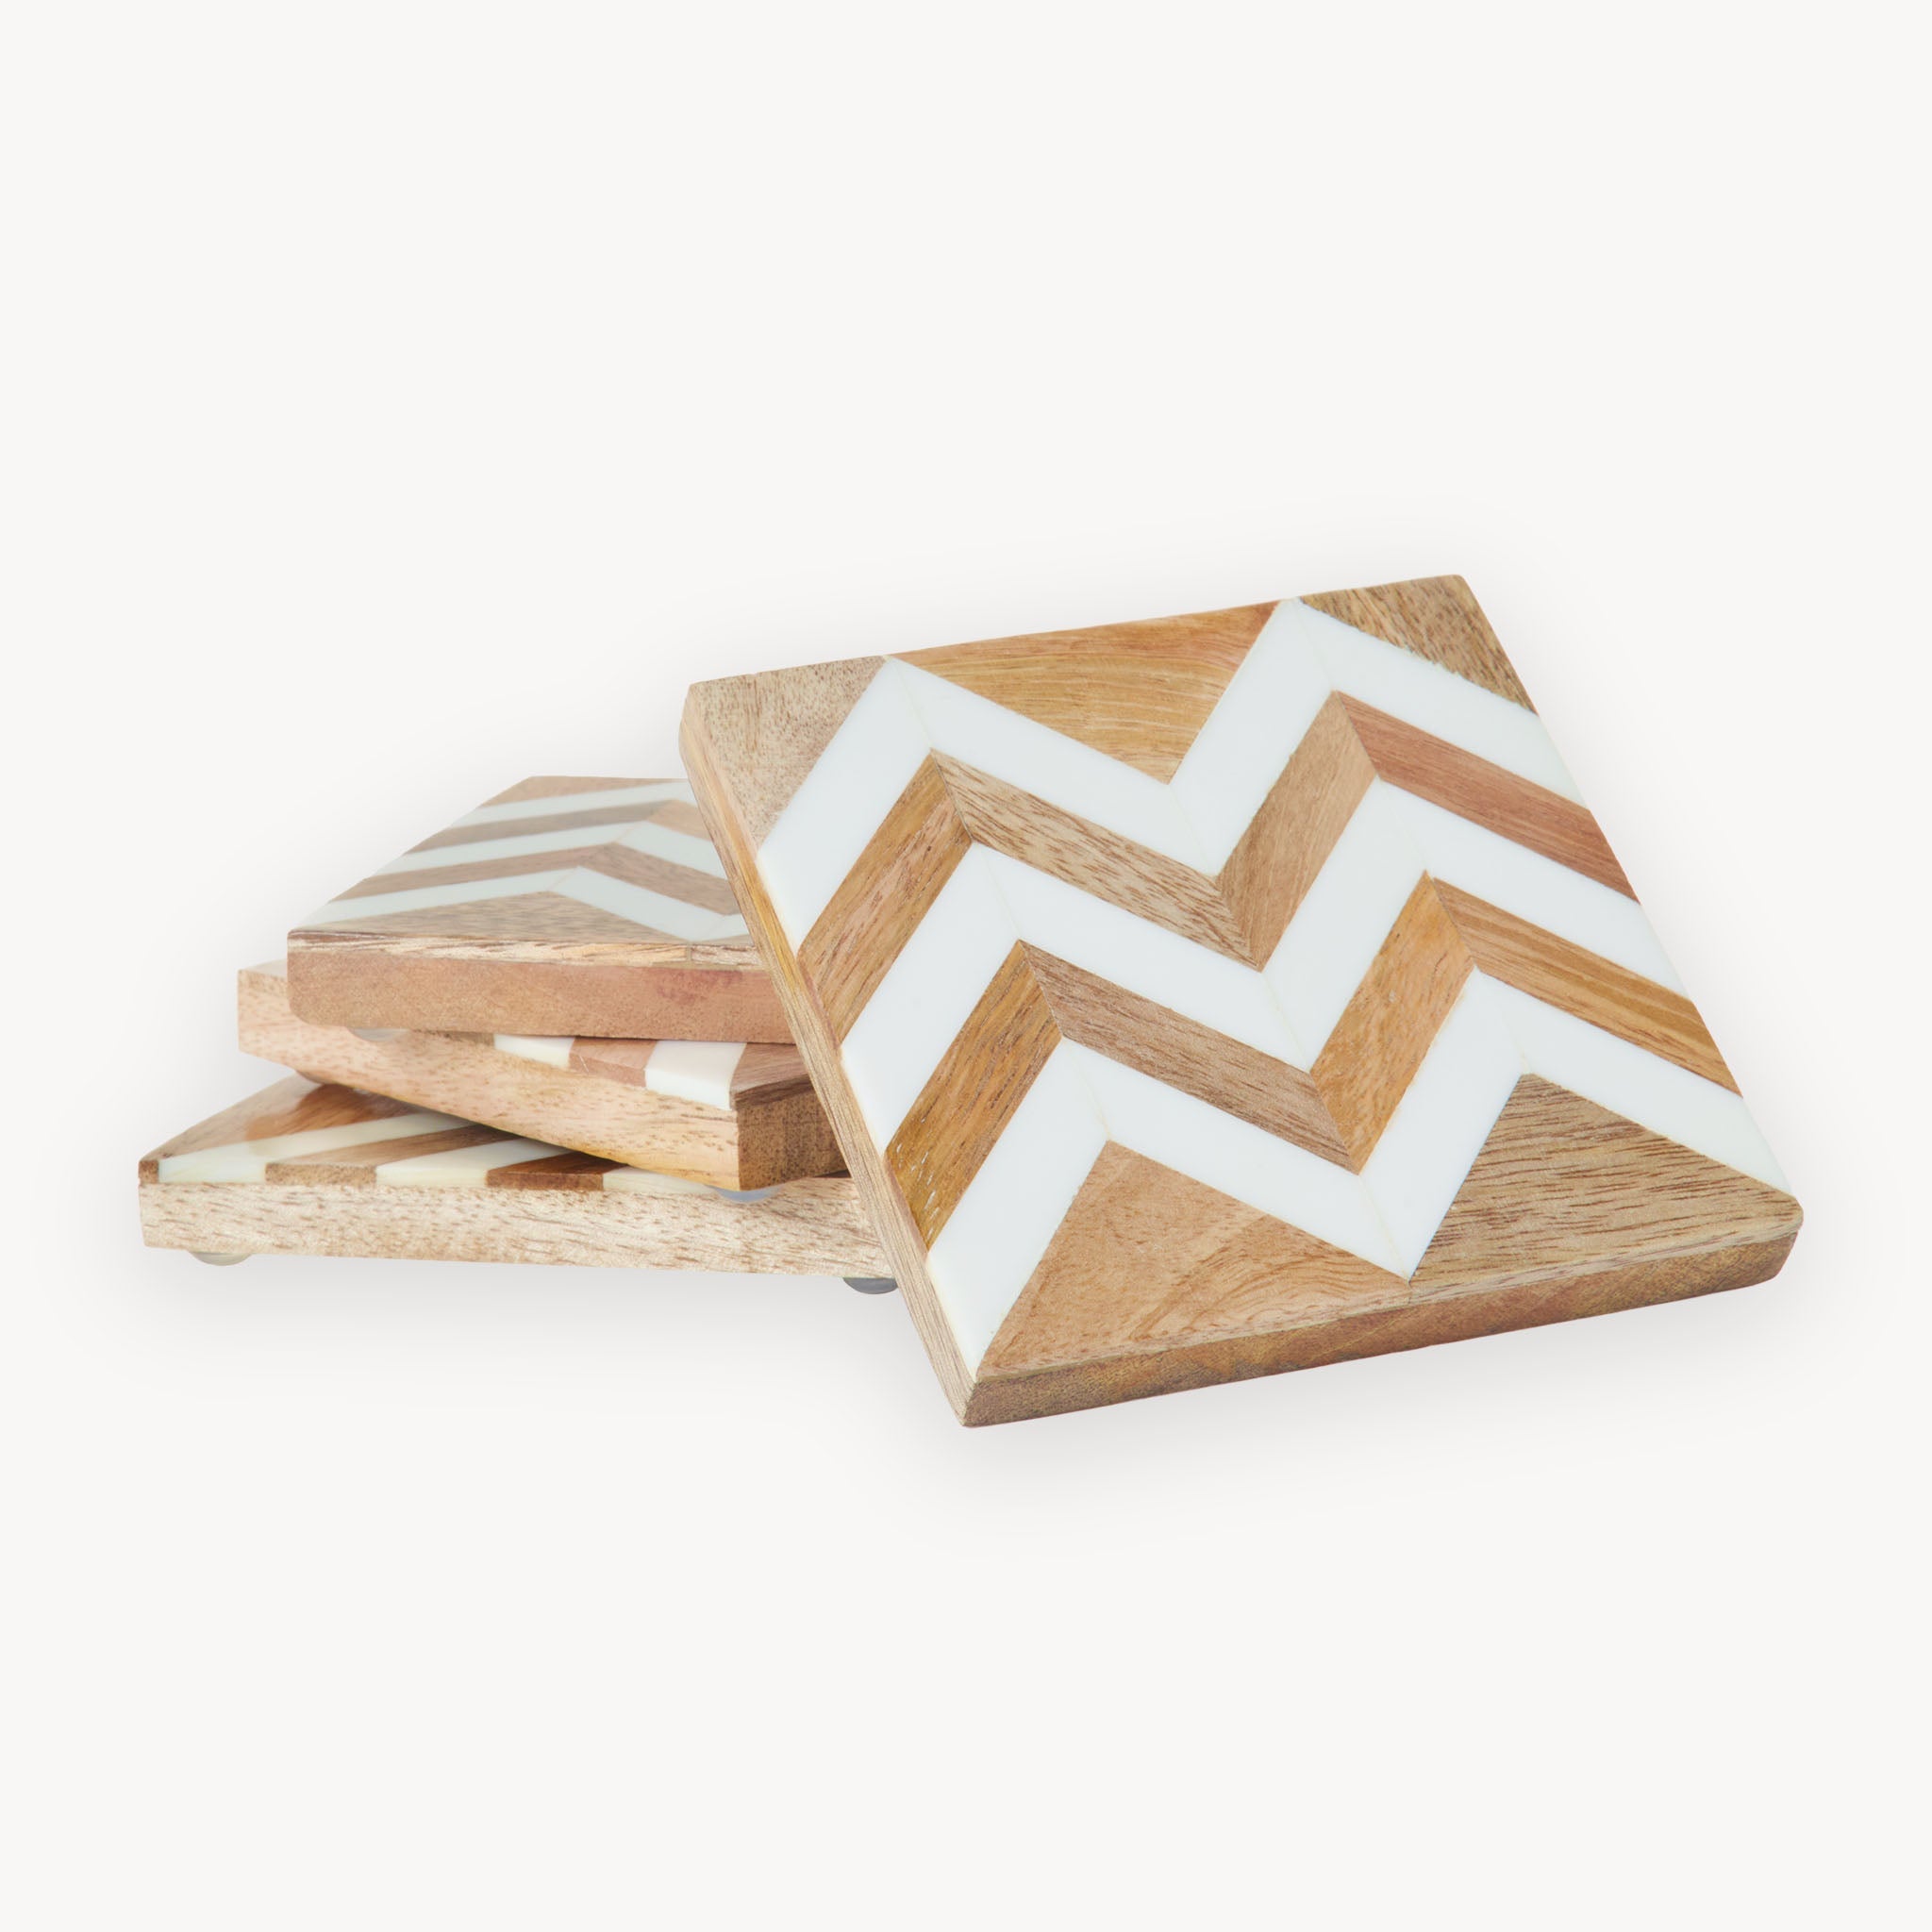 Wooden Coaster with Resin Finish - Set of 4